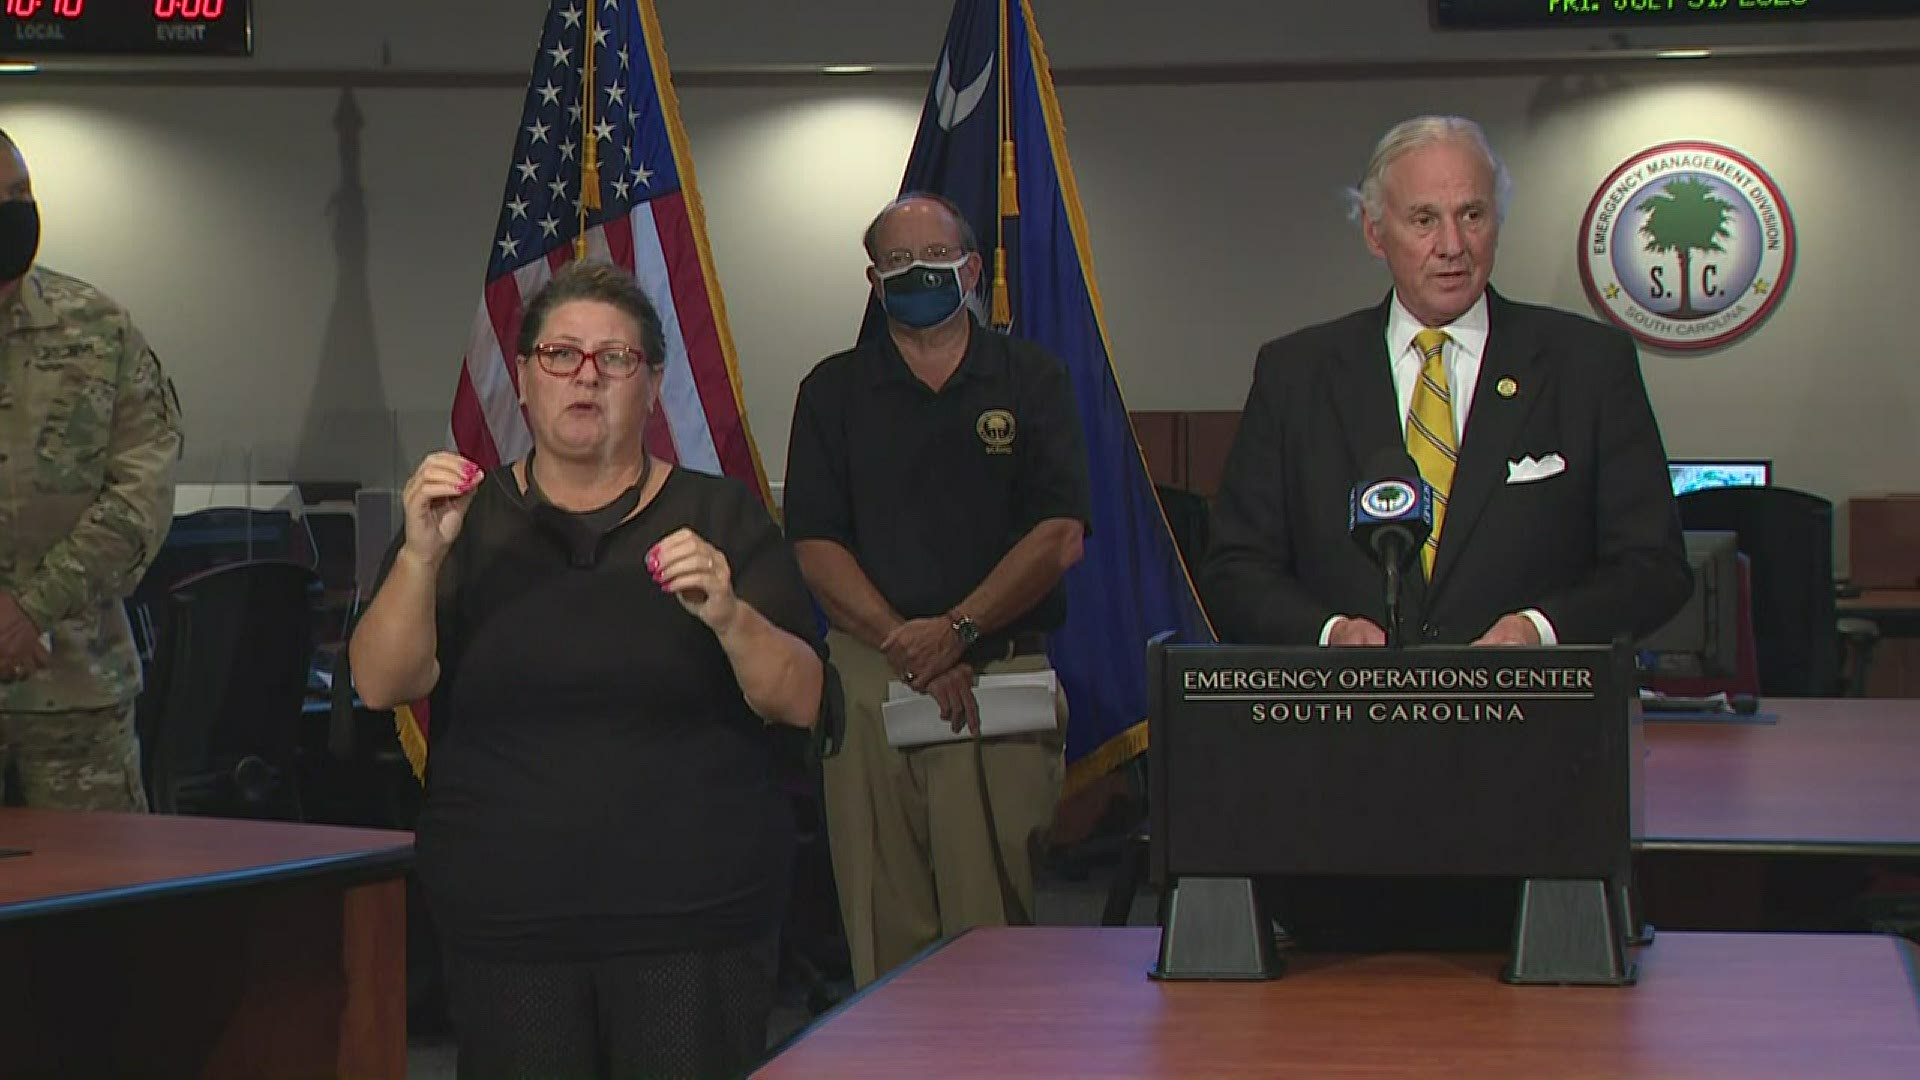 Gov. Henry McMaster said Friday he does not plan to issue a state of emergency or evacuation order due to Hurriane Isaias, at least so far.